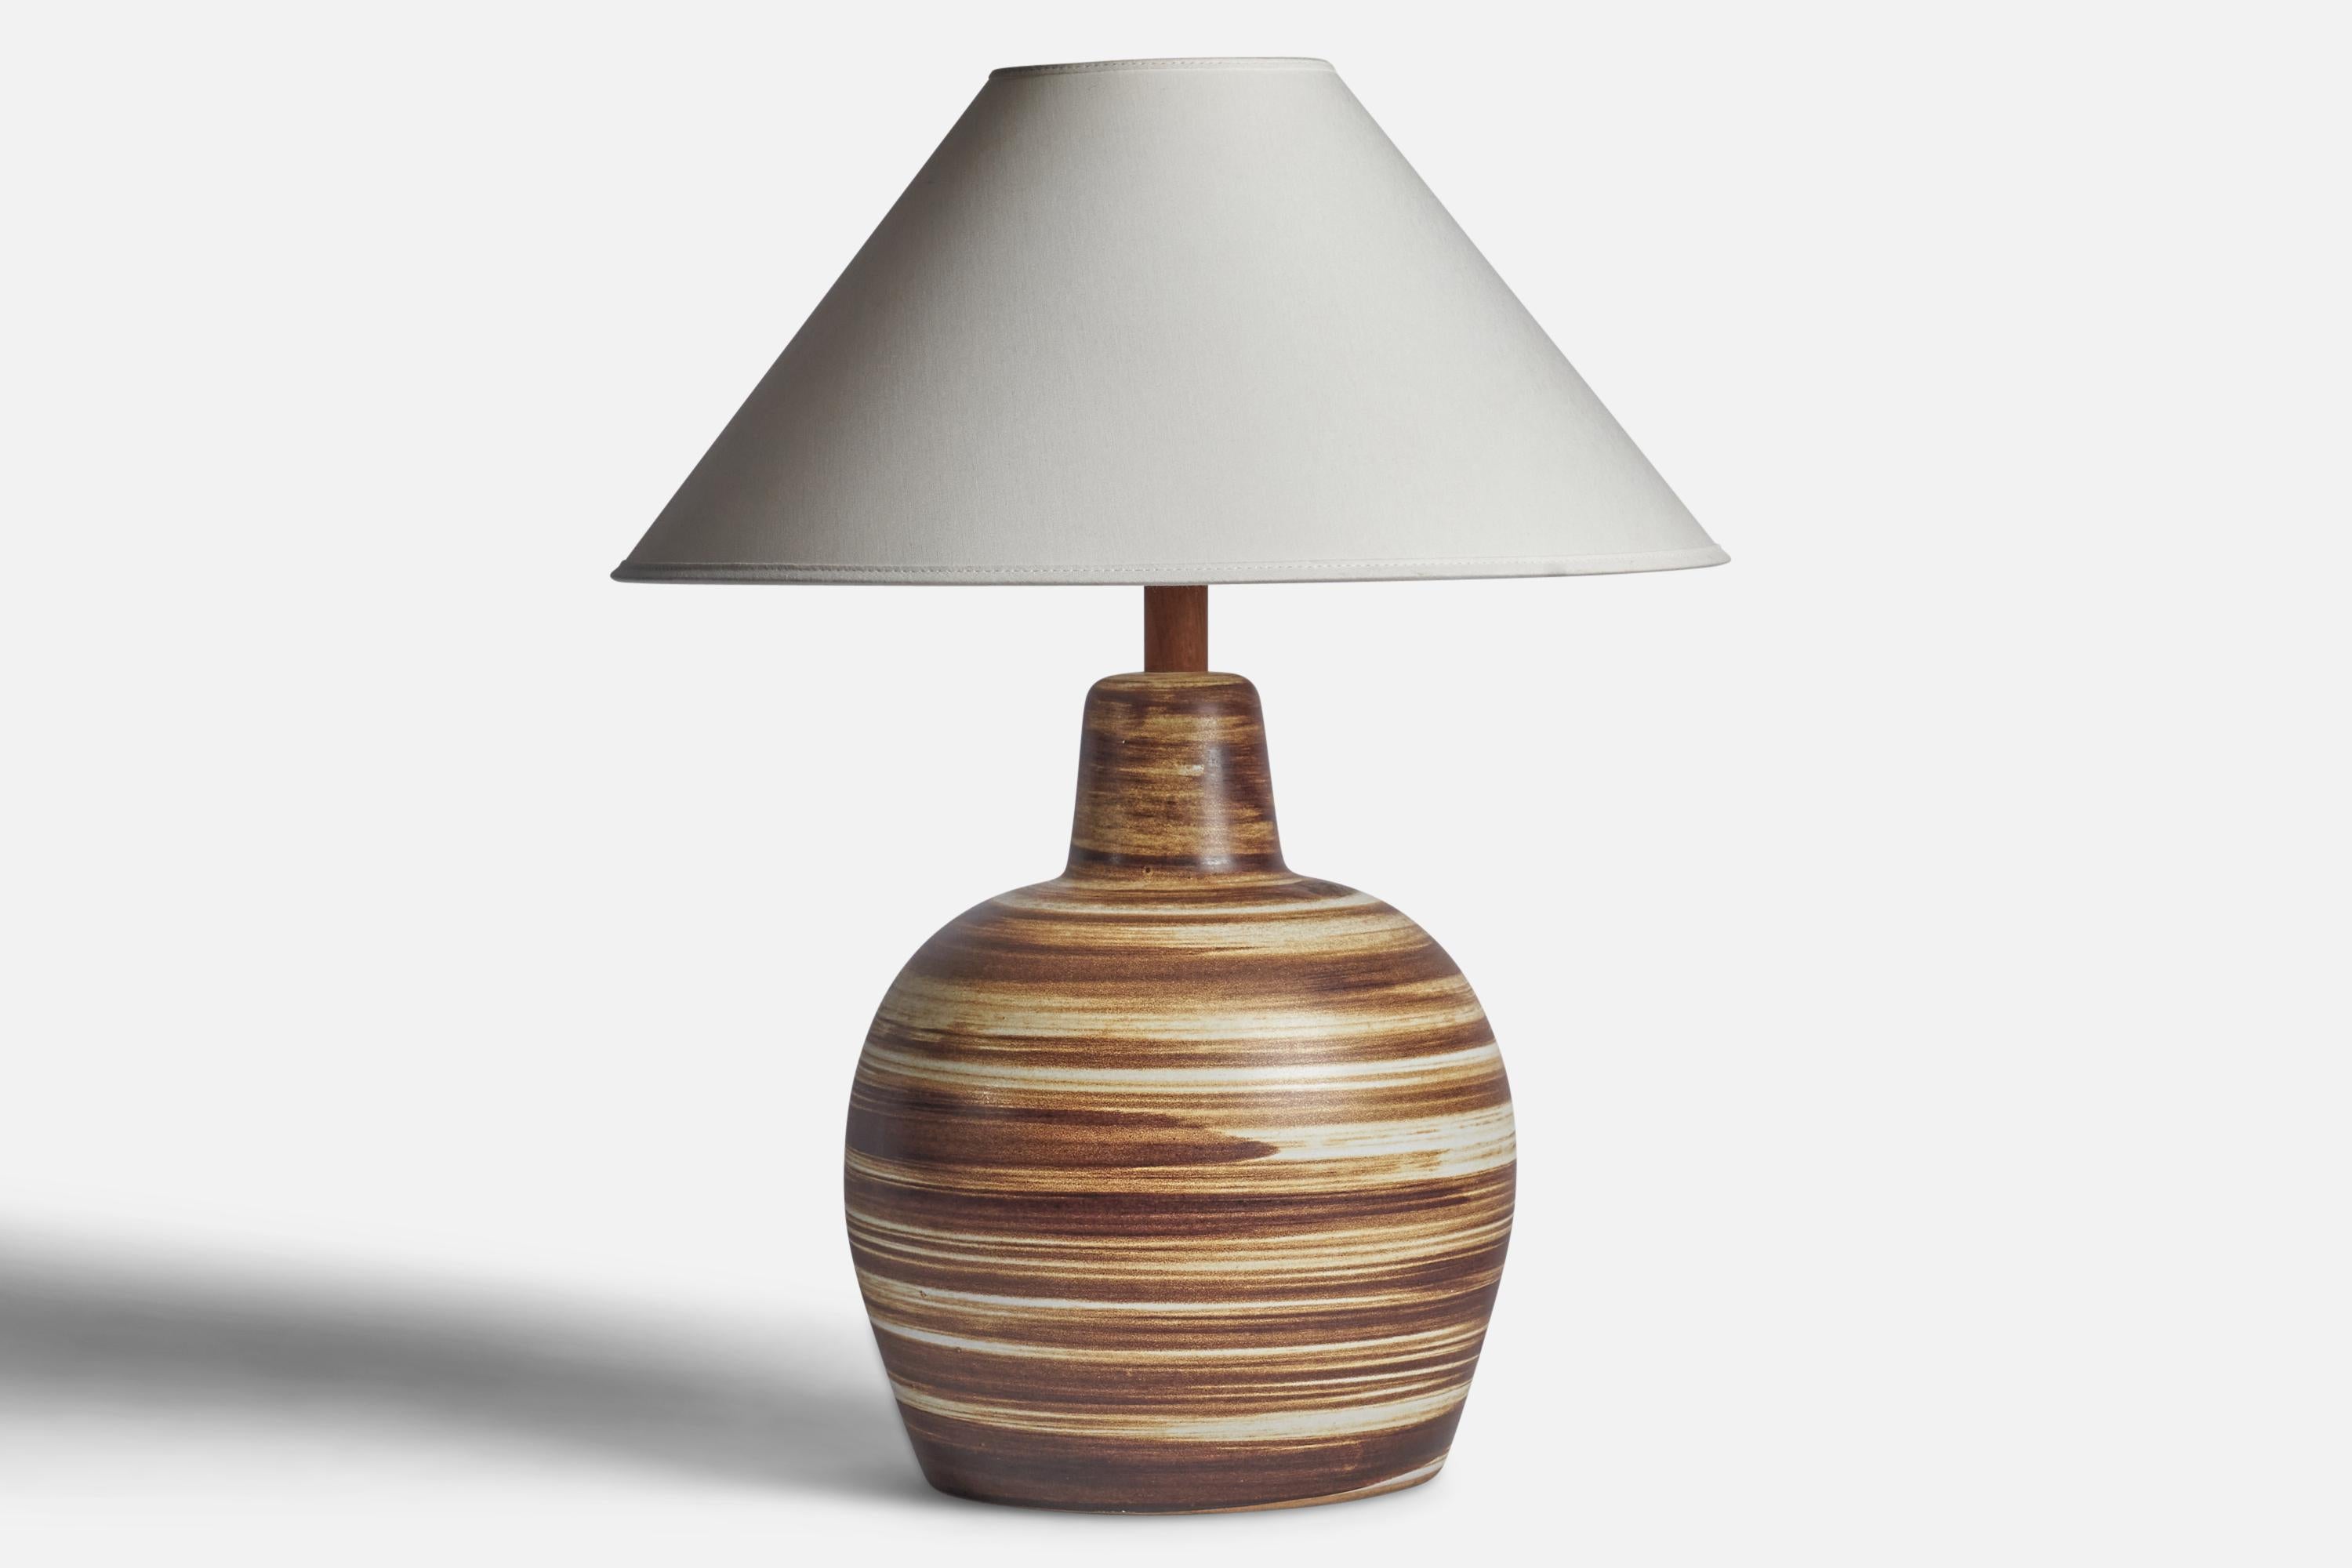 A beige and brown-glazed ceramic and walnut table lamp designed by Jane & Gordon Martz and produced by Marshall Studios, USA, 1960s.

Dimensions of Lamp (inches): 15.65” H x 8.85” Diameter
Dimensions of Shade (inches): 4.5” Top Diameter x 16” Bottom